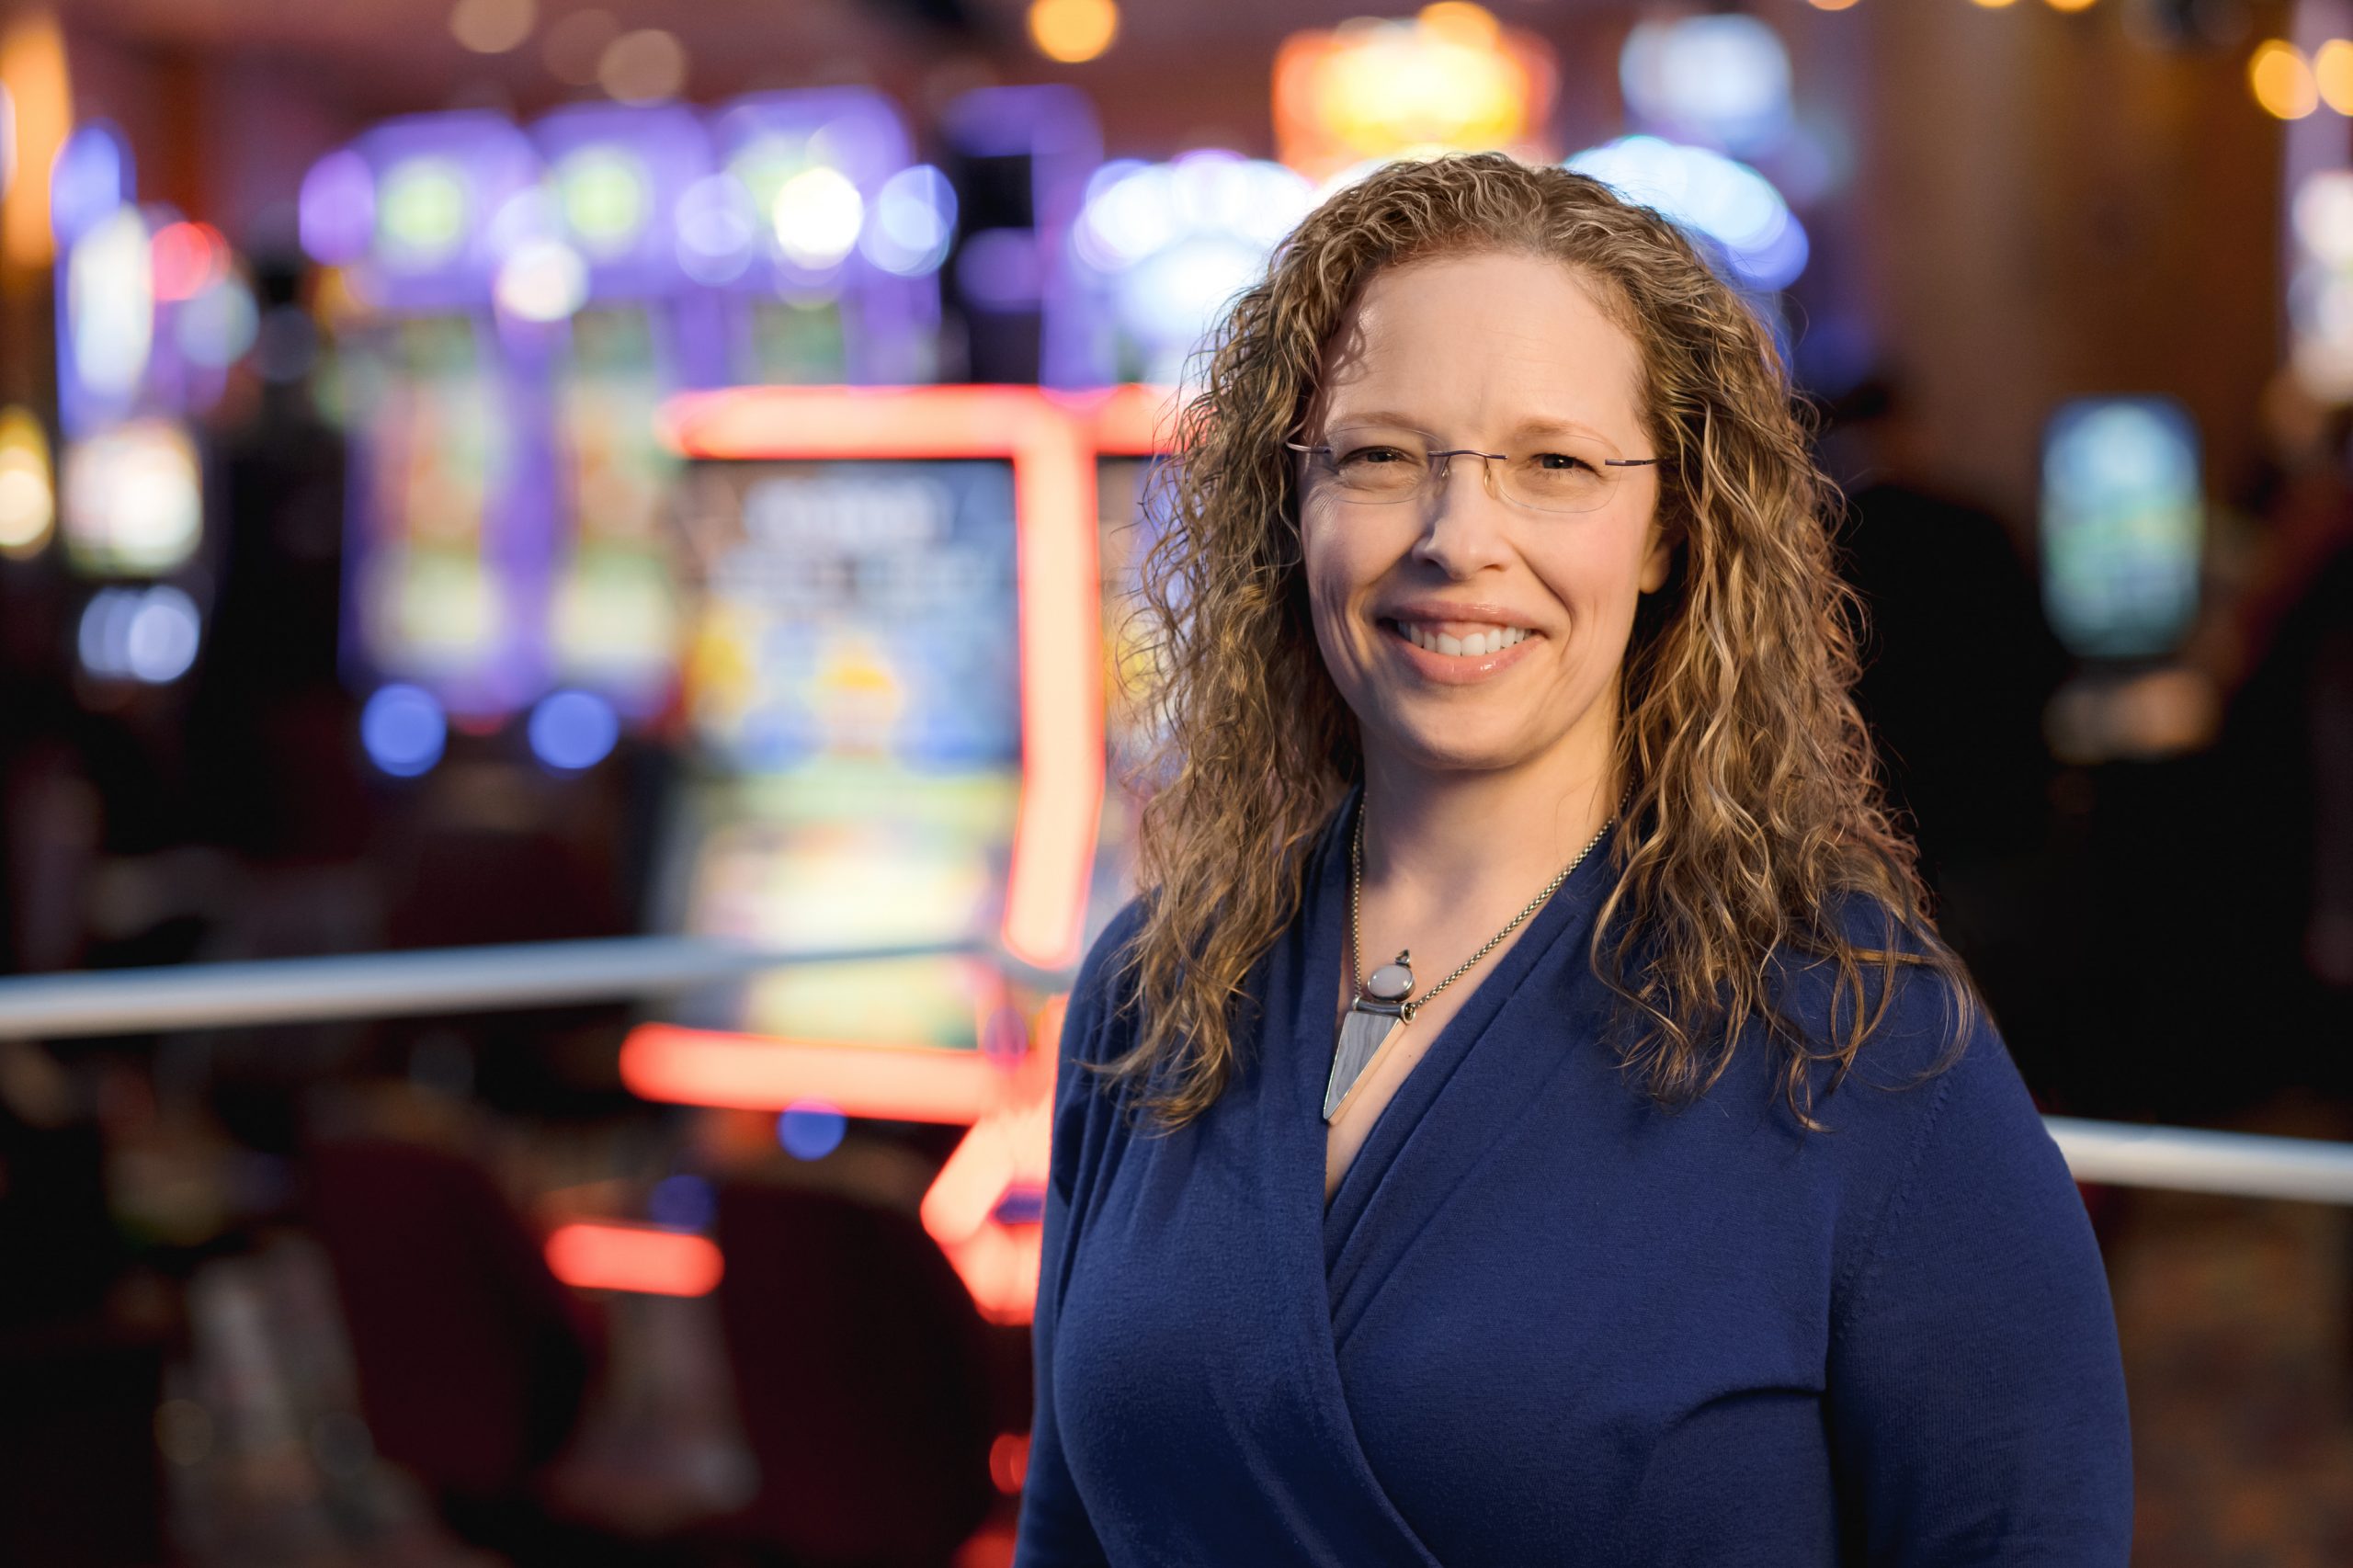 Potawatomi Hotel & Casino Names New Chief Financial Officer, Chief Information Officer